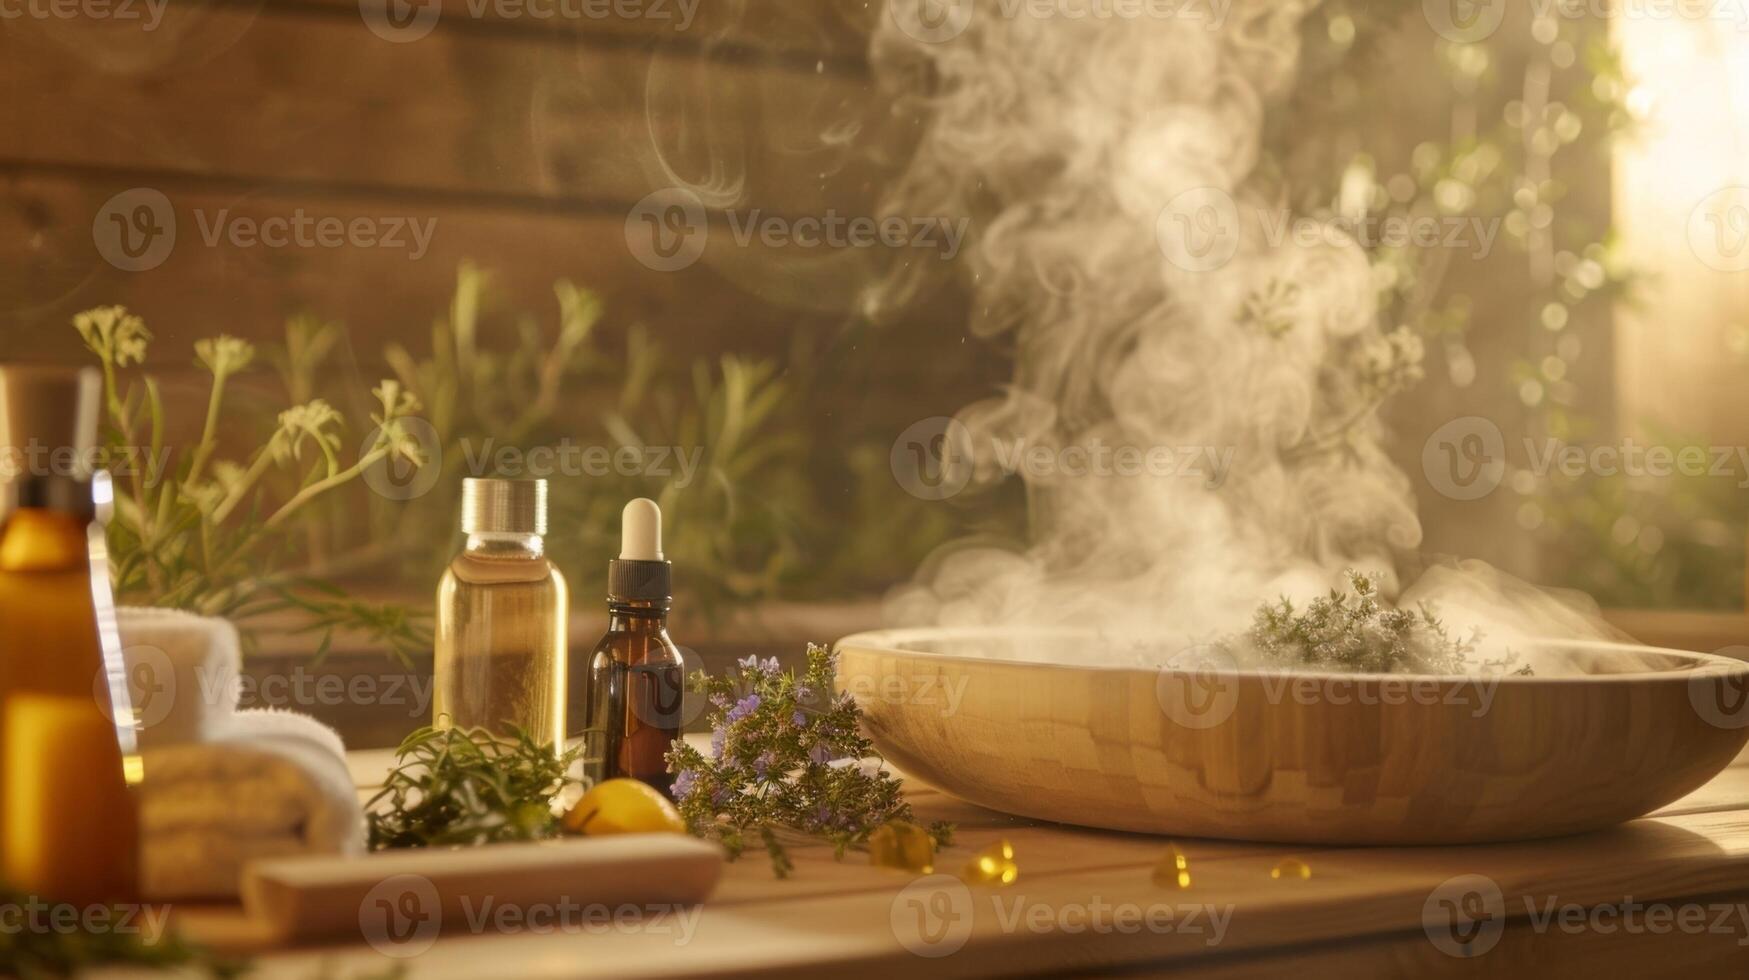 The steam swirls around a sauna organizer as they carefully lay out detoxifying herbs and oils ready for a postfestivity sauna session. photo